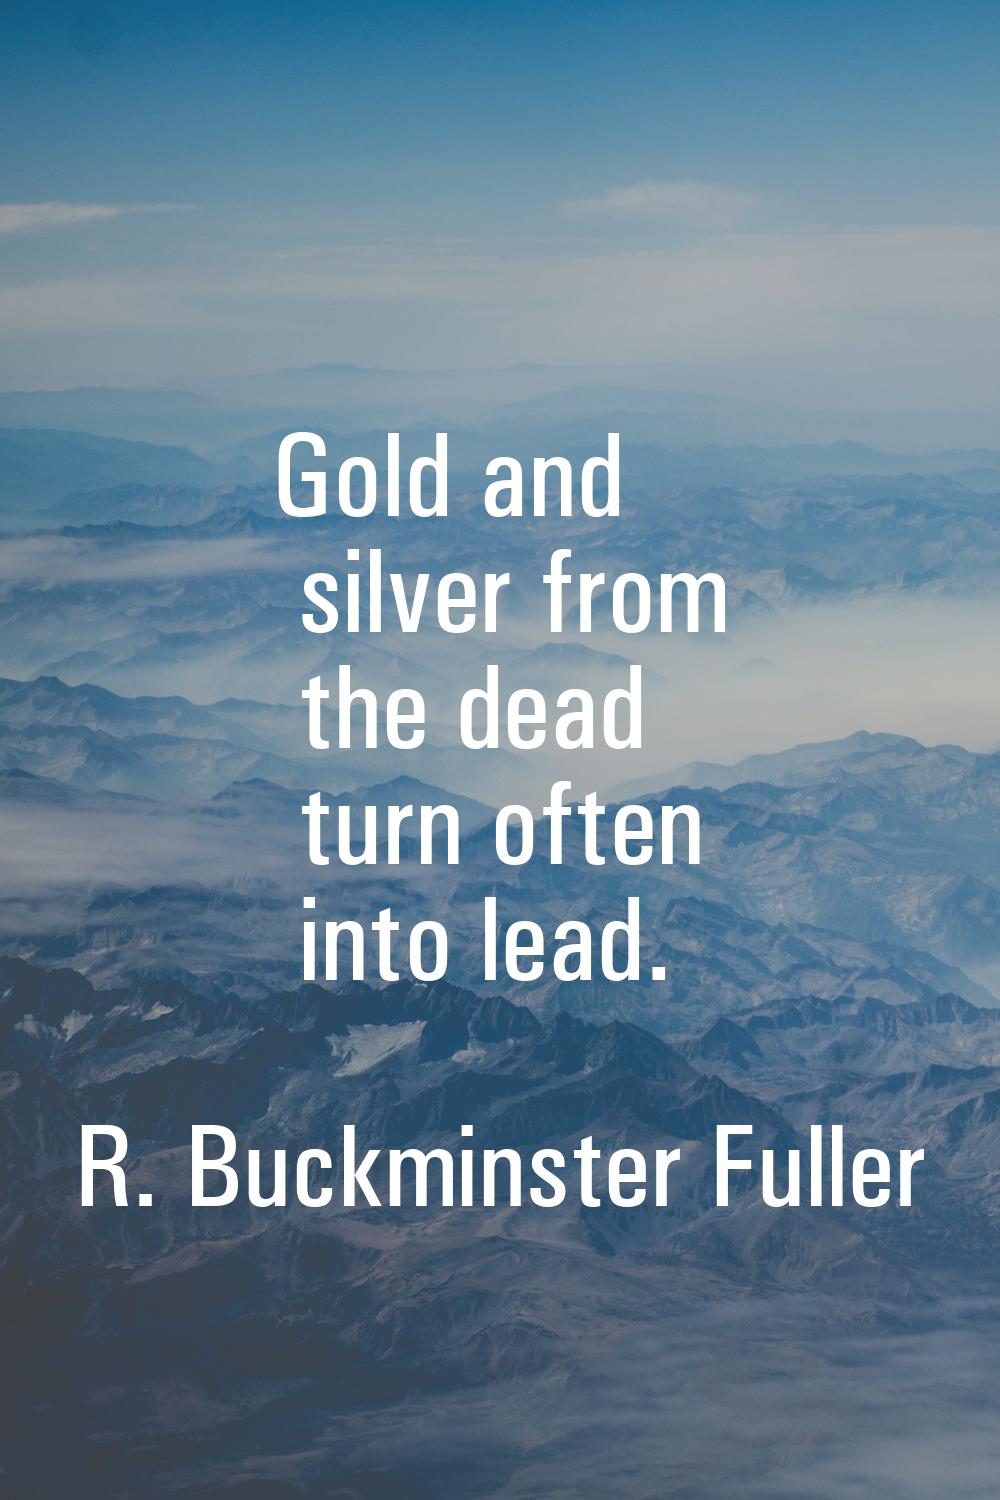 Gold and silver from the dead turn often into lead.